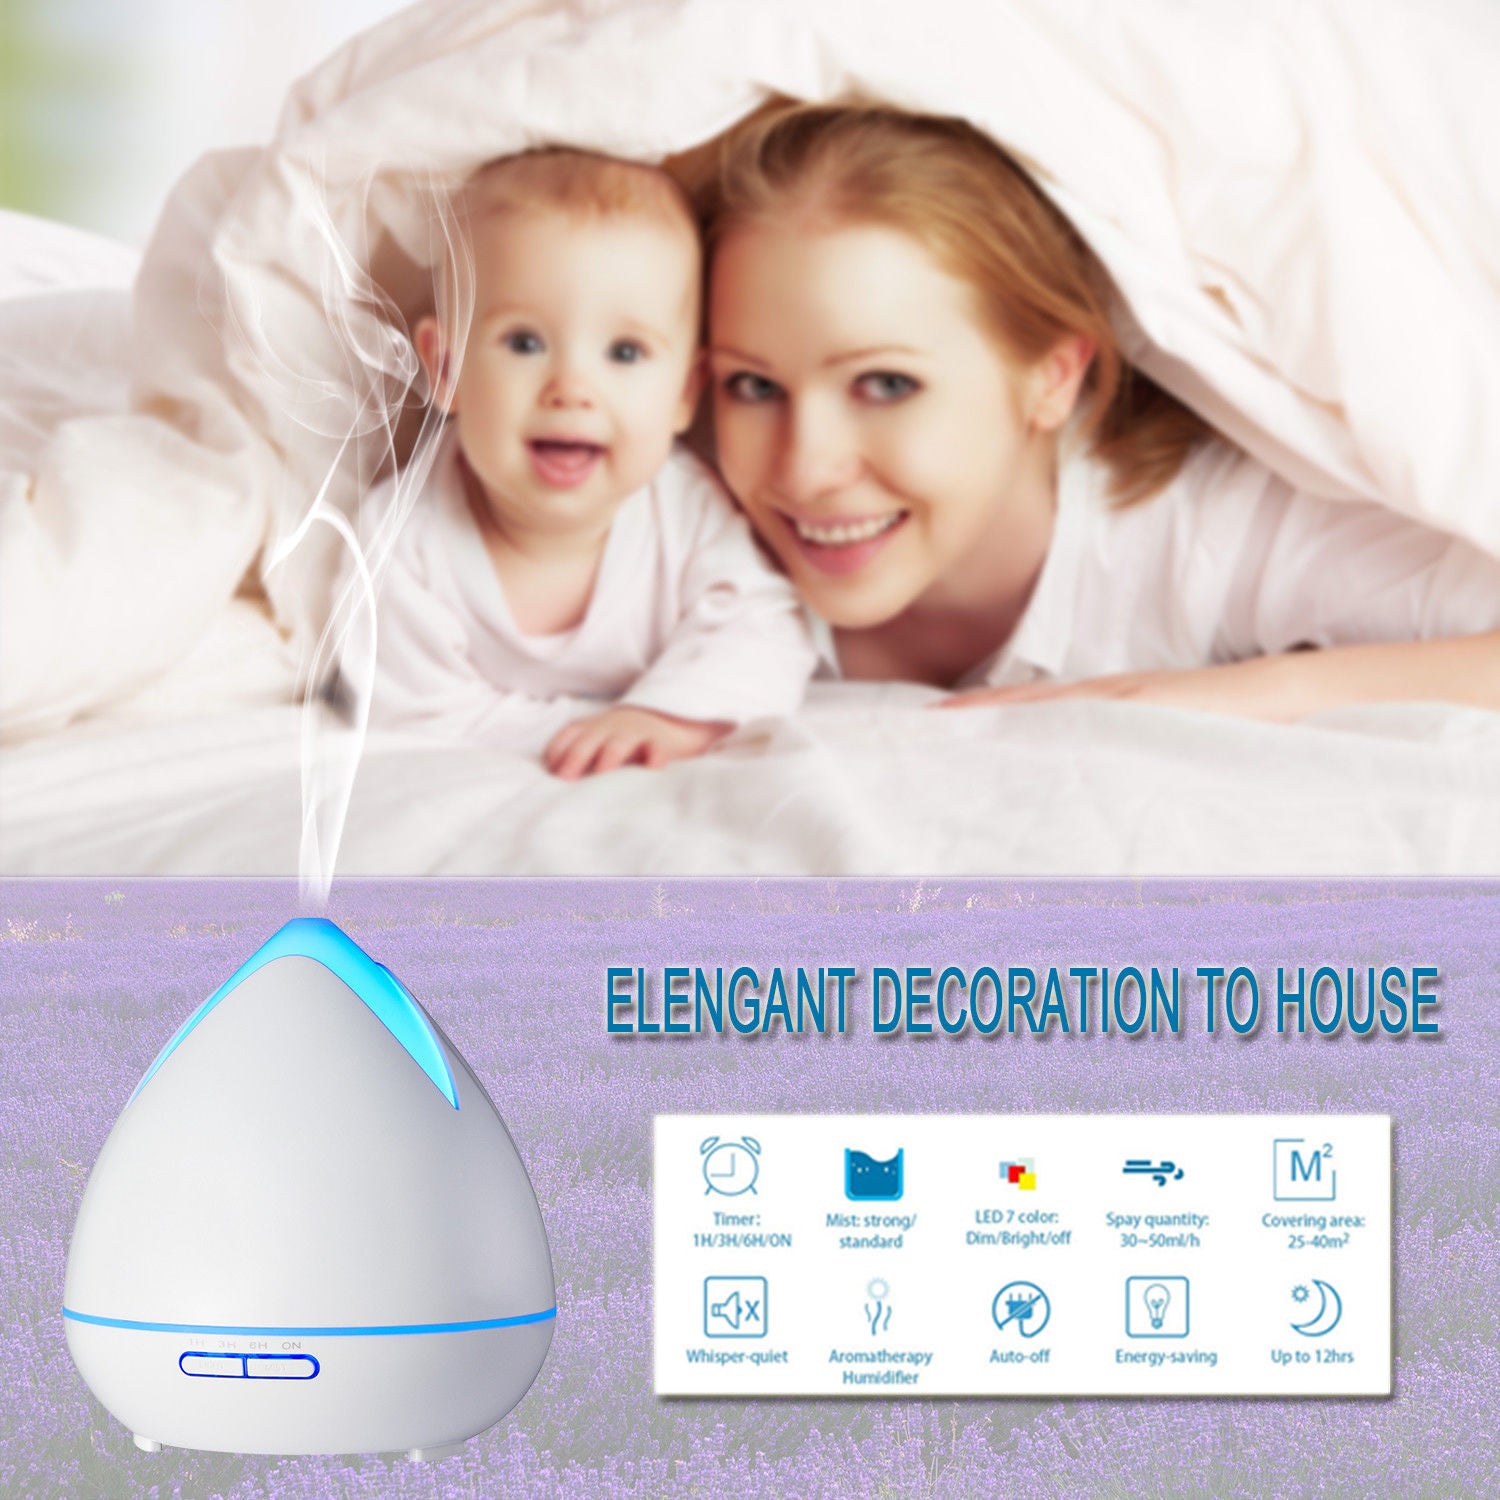 Essential Oils Ultrasonic Aromatherapy Diffuser Air Humidifier Purify 400ML - White - SILBERSHELL